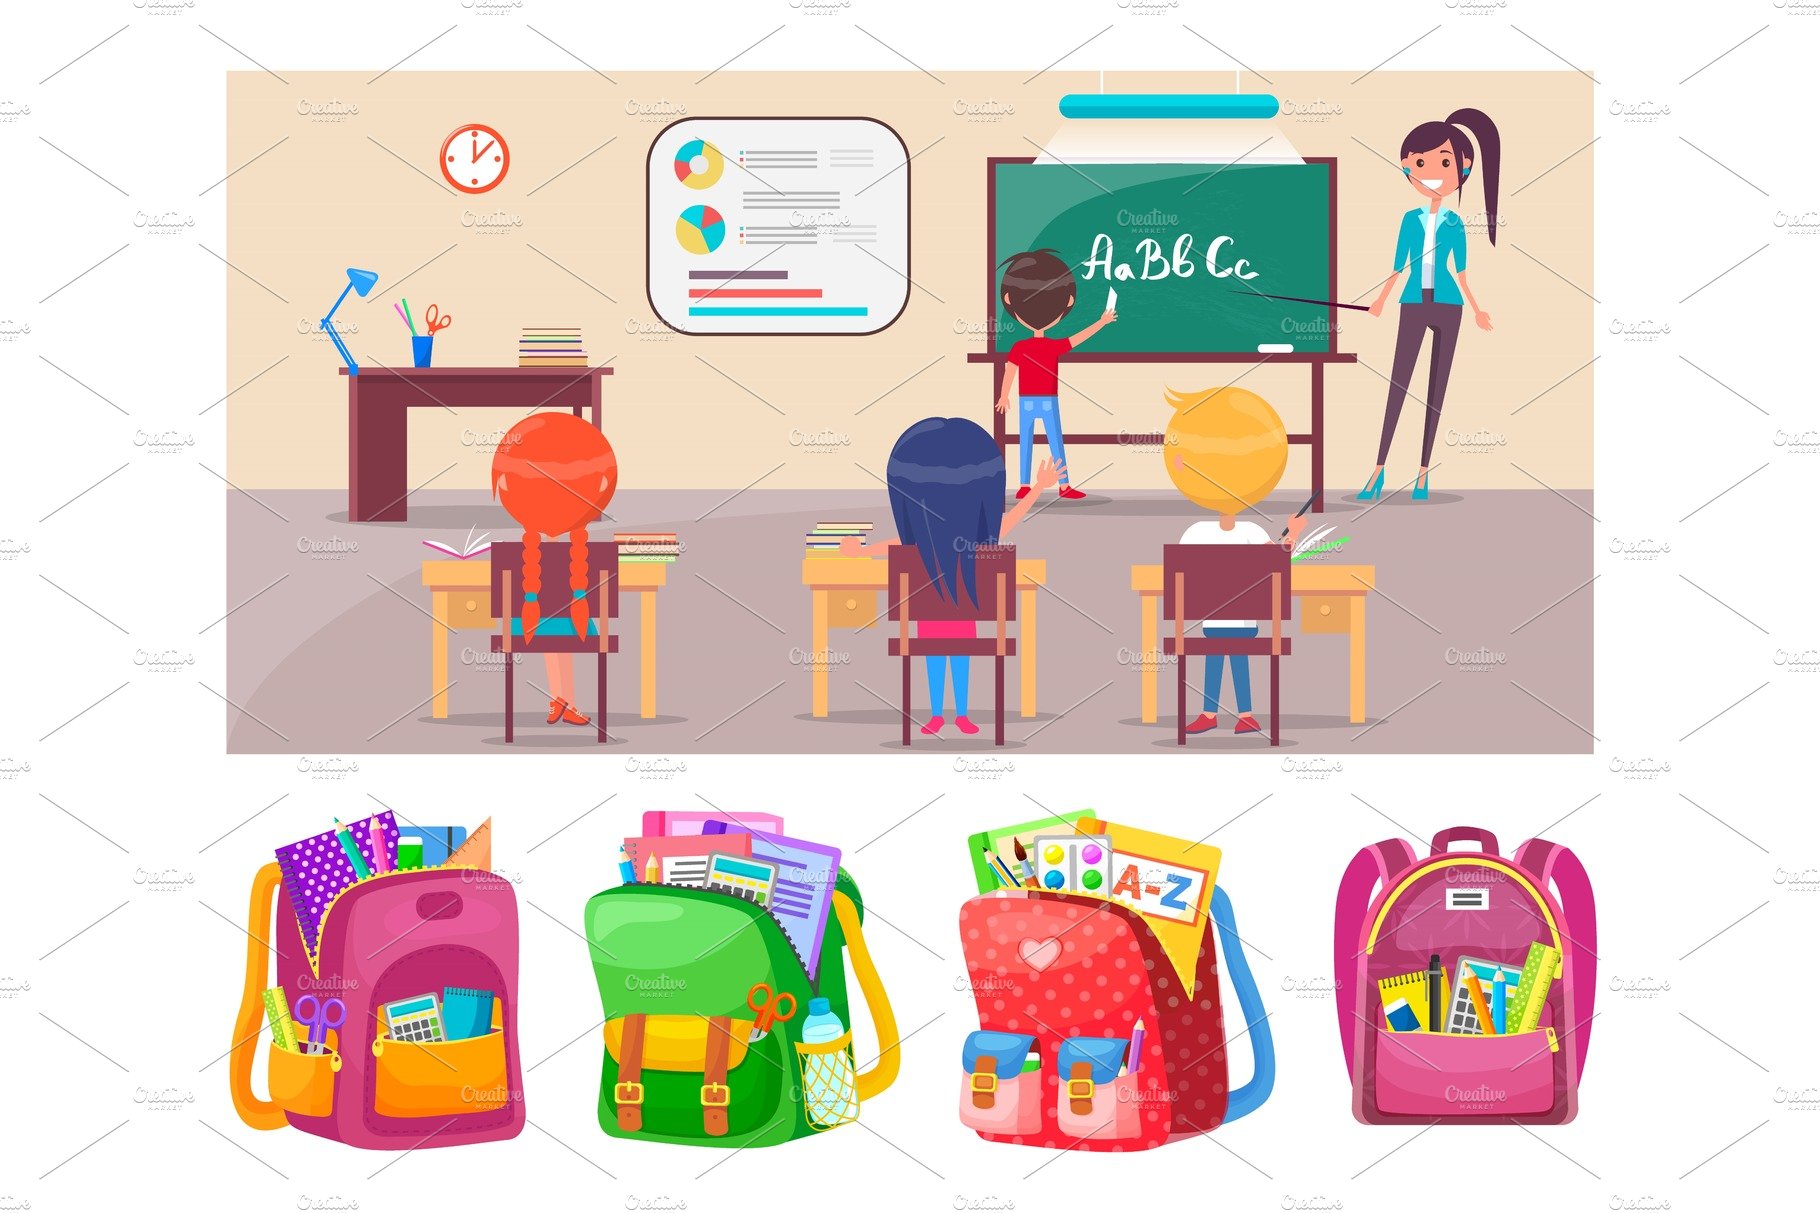 Children learning letters at school cover image.